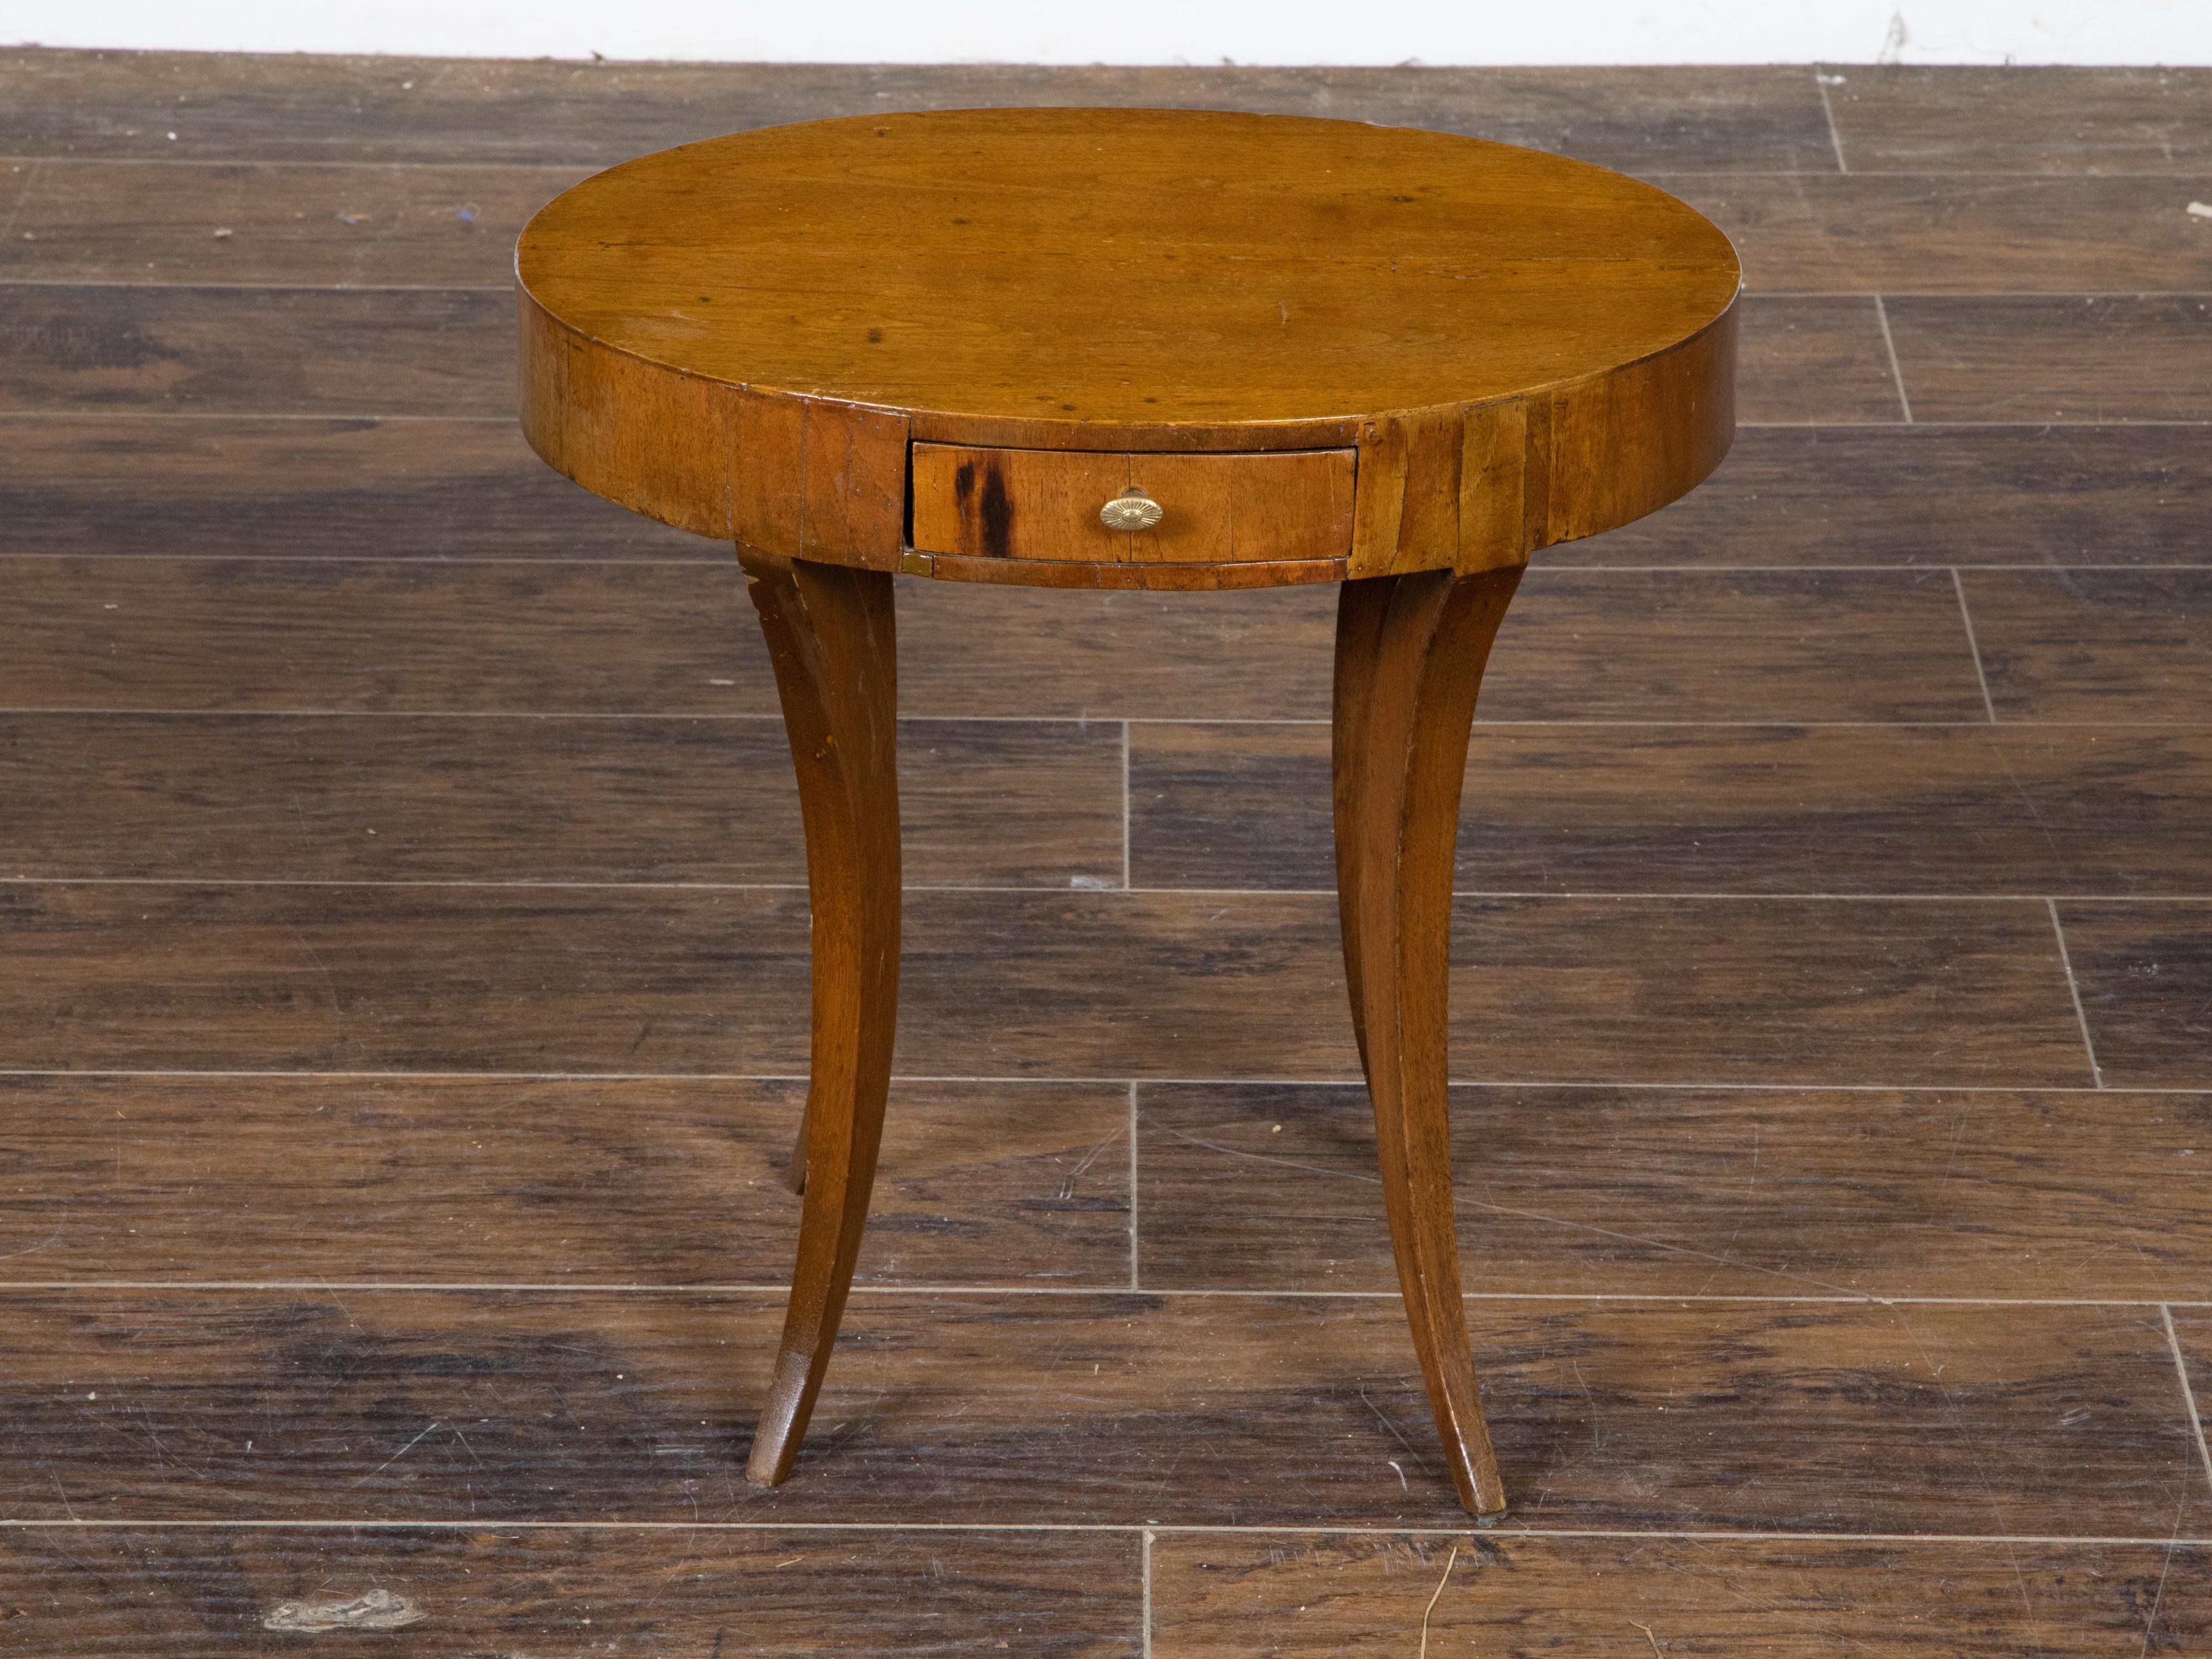 Veneer Italian 1810s Neoclassical Walnut Table with Oval Top, Drawer and Saber Legs For Sale